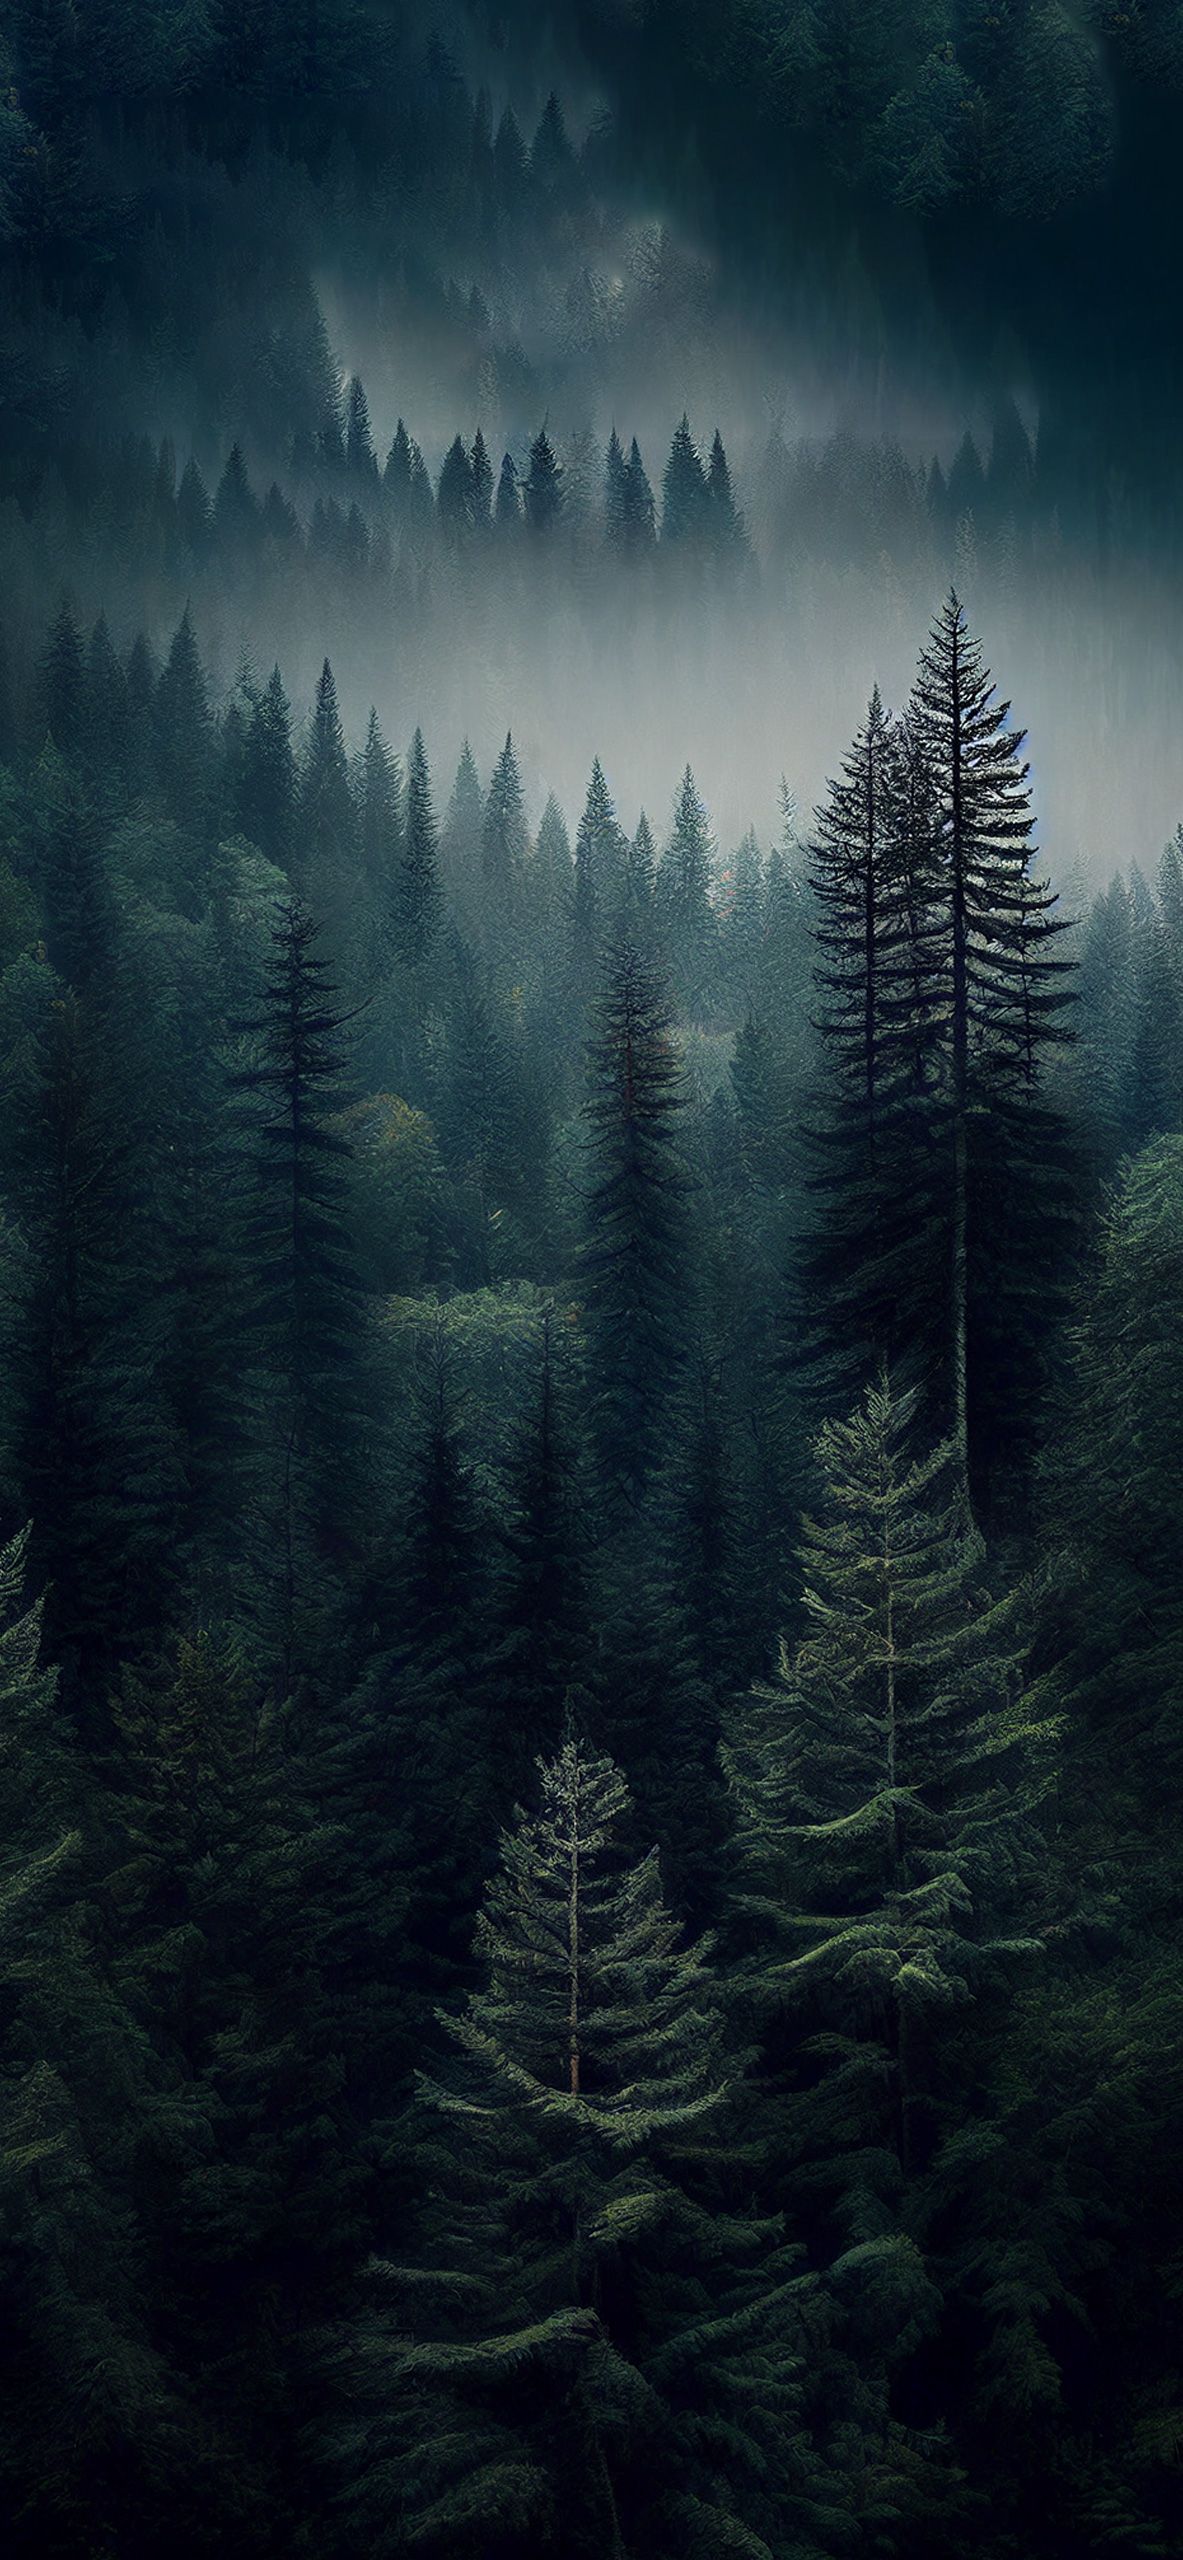 A forest with trees and fog in the background - Fog, forest, foggy forest